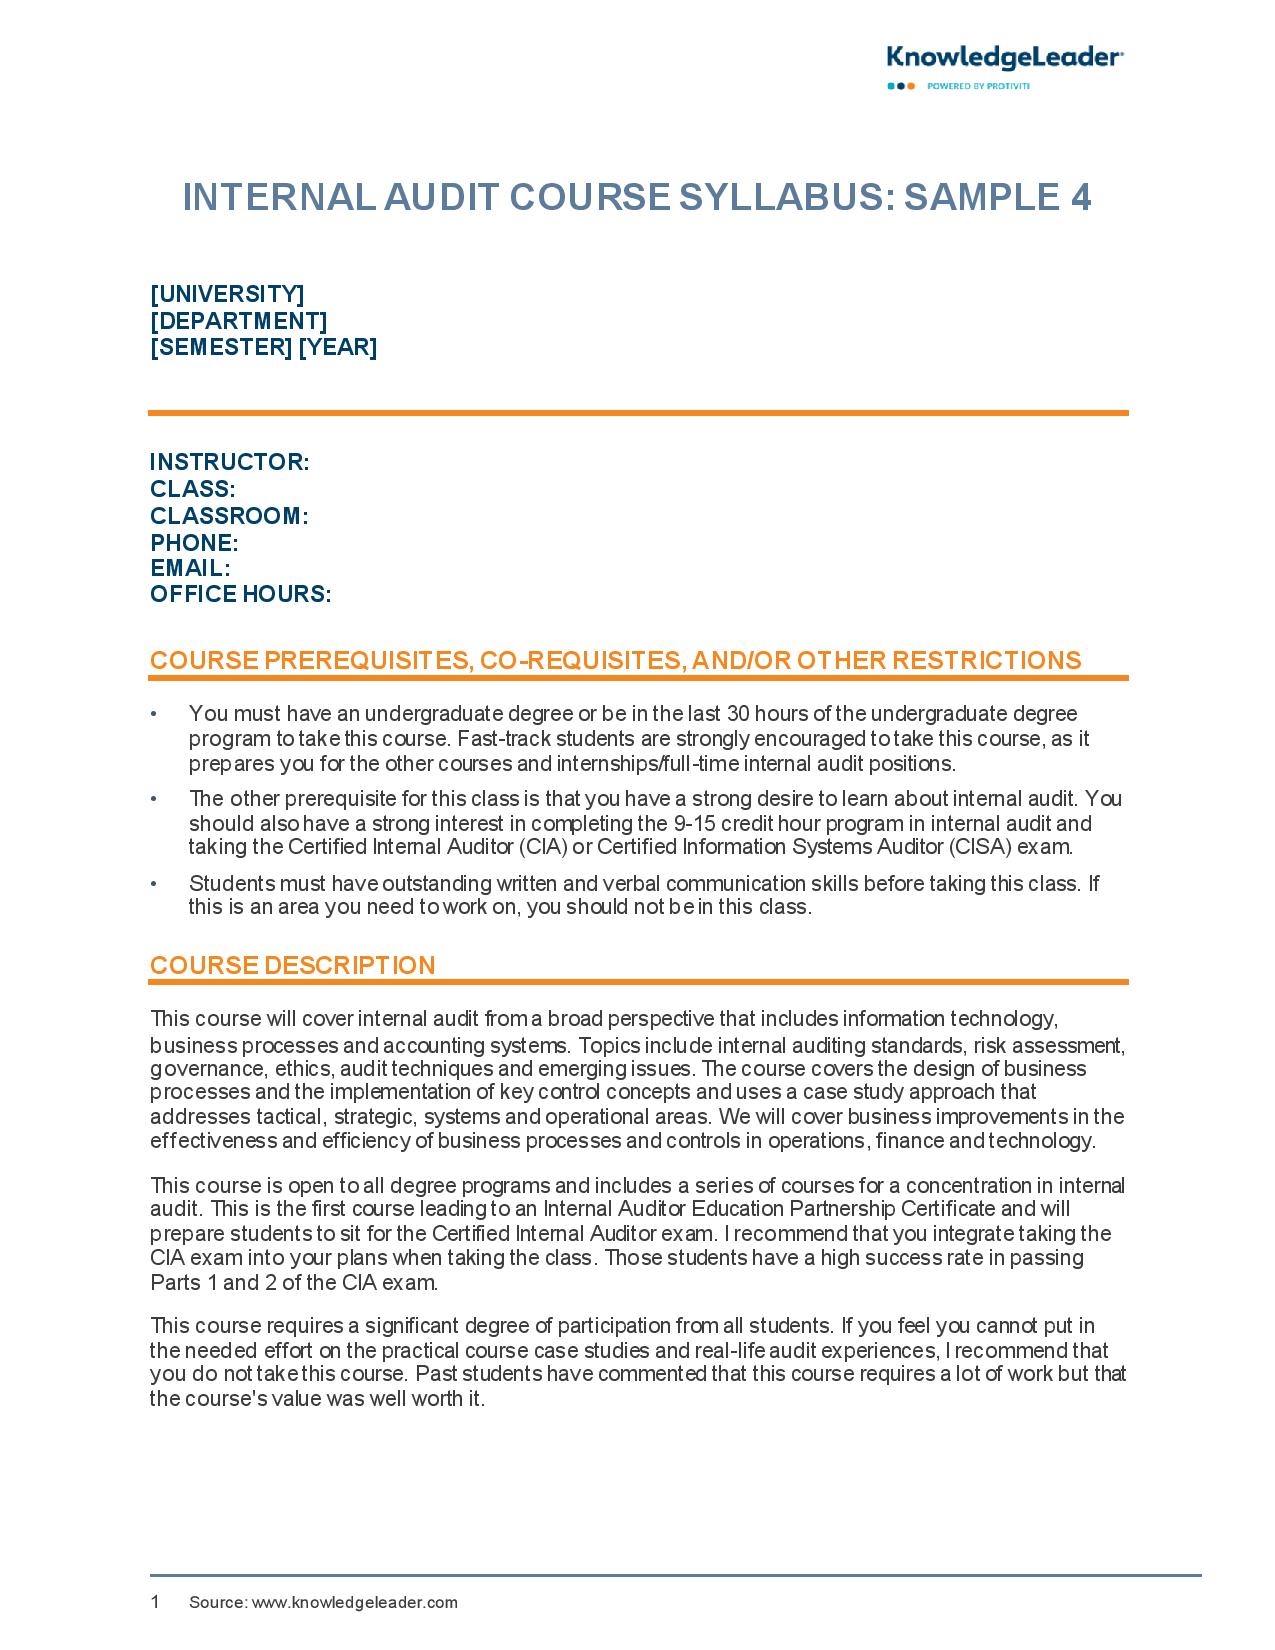 Screenshot of first page of Internal Audit Course Syllabus Sample 4